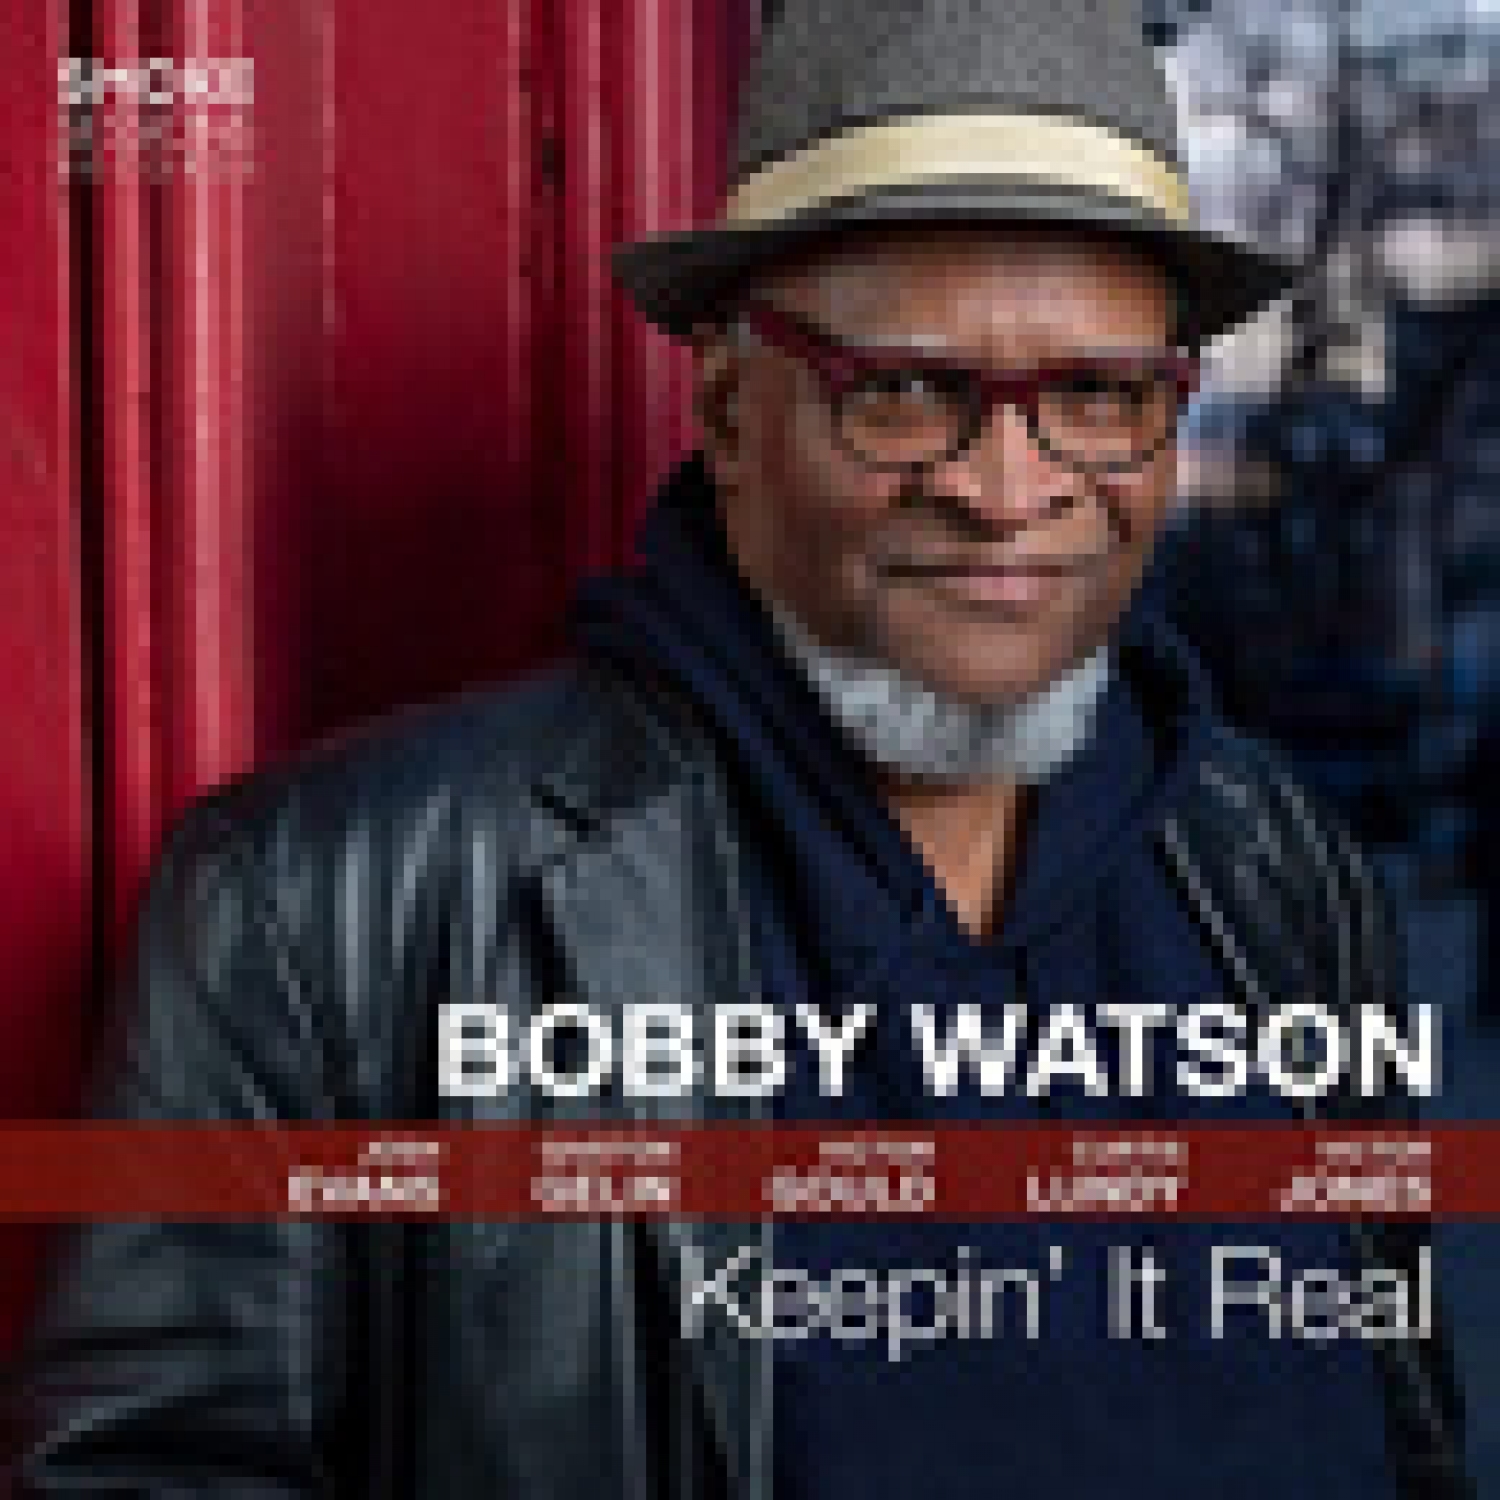 Art for One for John by Bobby Watson